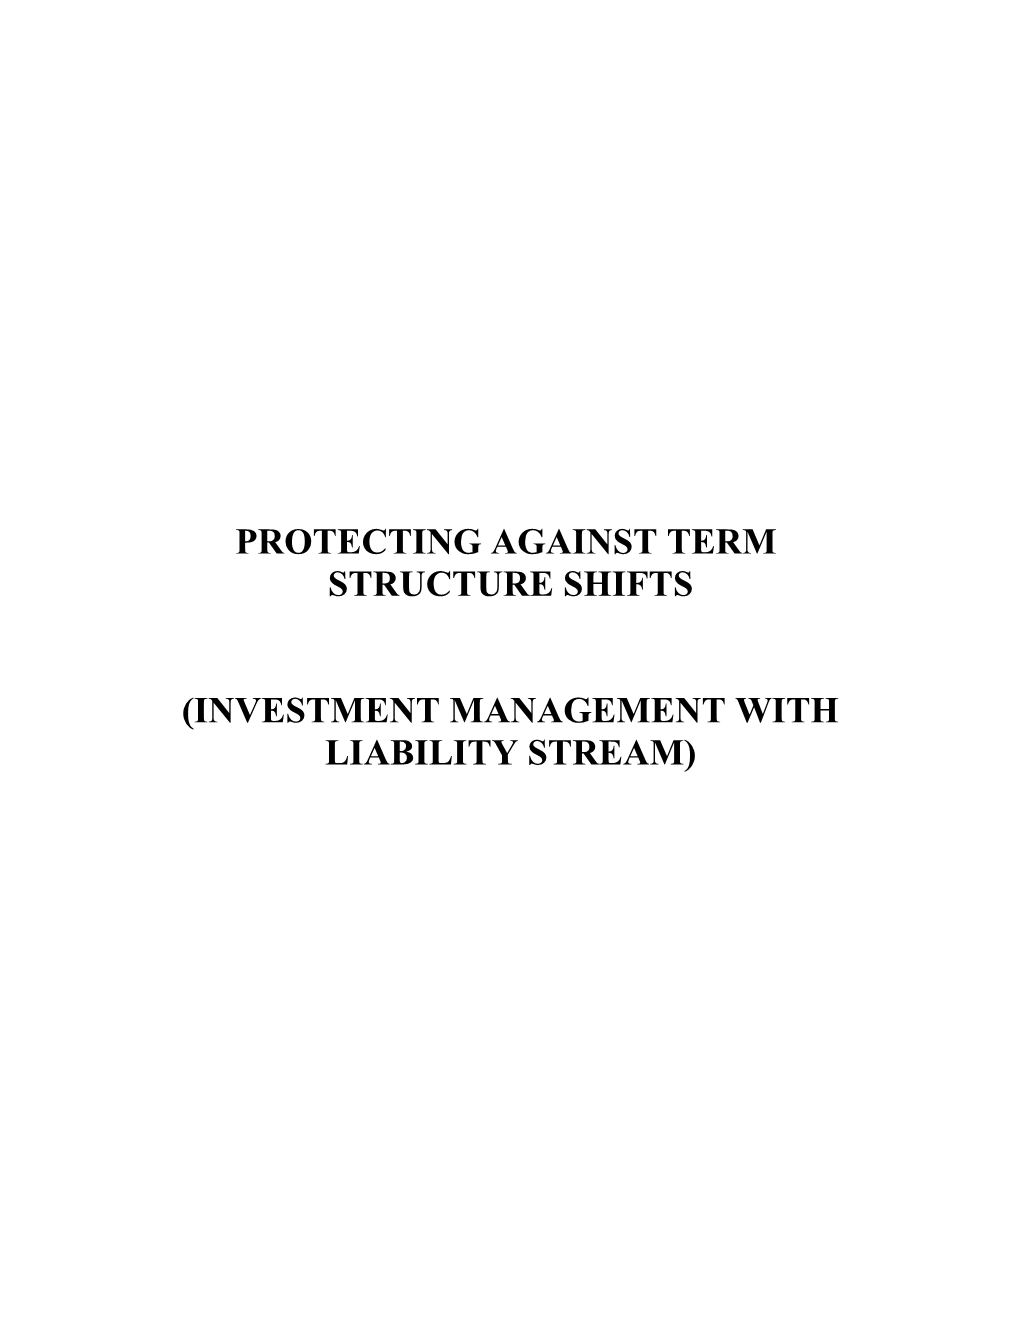 Investment Management with Liability Stream